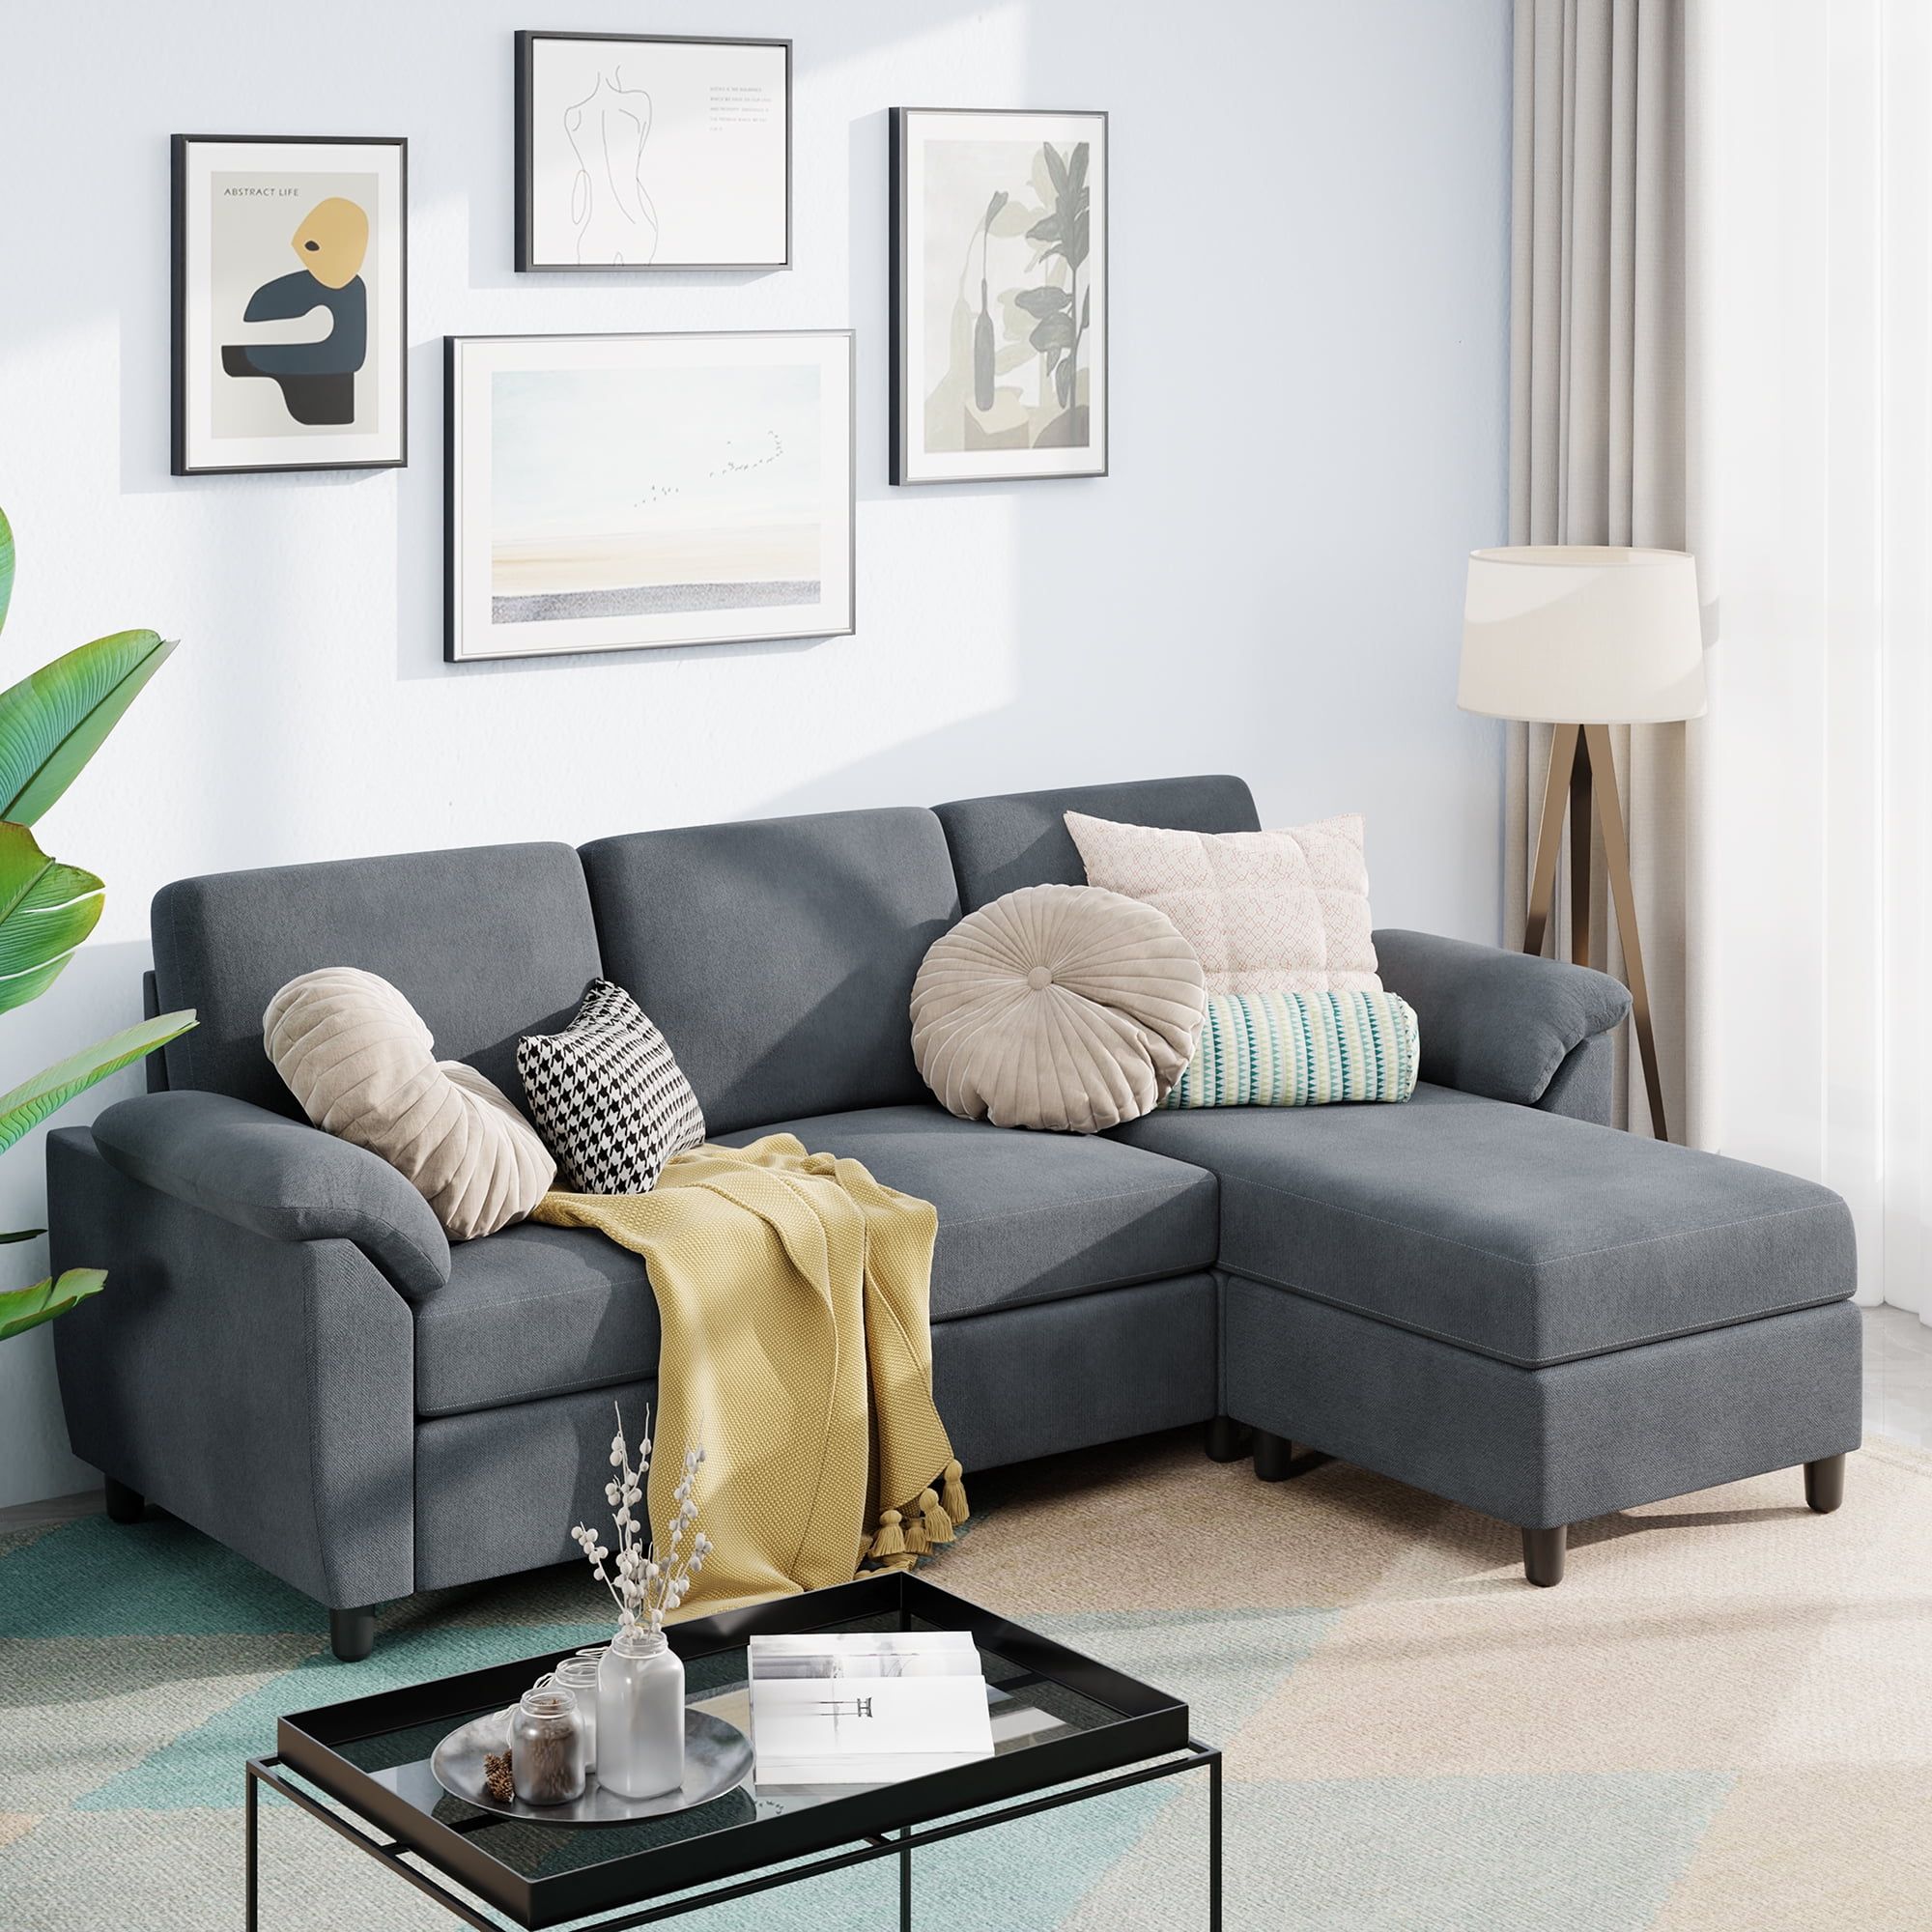 Sobaniilo 79" Convertible Sectional Sofa Couch, 3 Seat L Shaped Sofa With  Removable Pillows Linen Fabric Small Couch Mid Century For Living Room,  Apartment And Office (gray) – Walmart Pertaining To Convertible L Shaped Sectional Sofas (Photo 3 of 15)